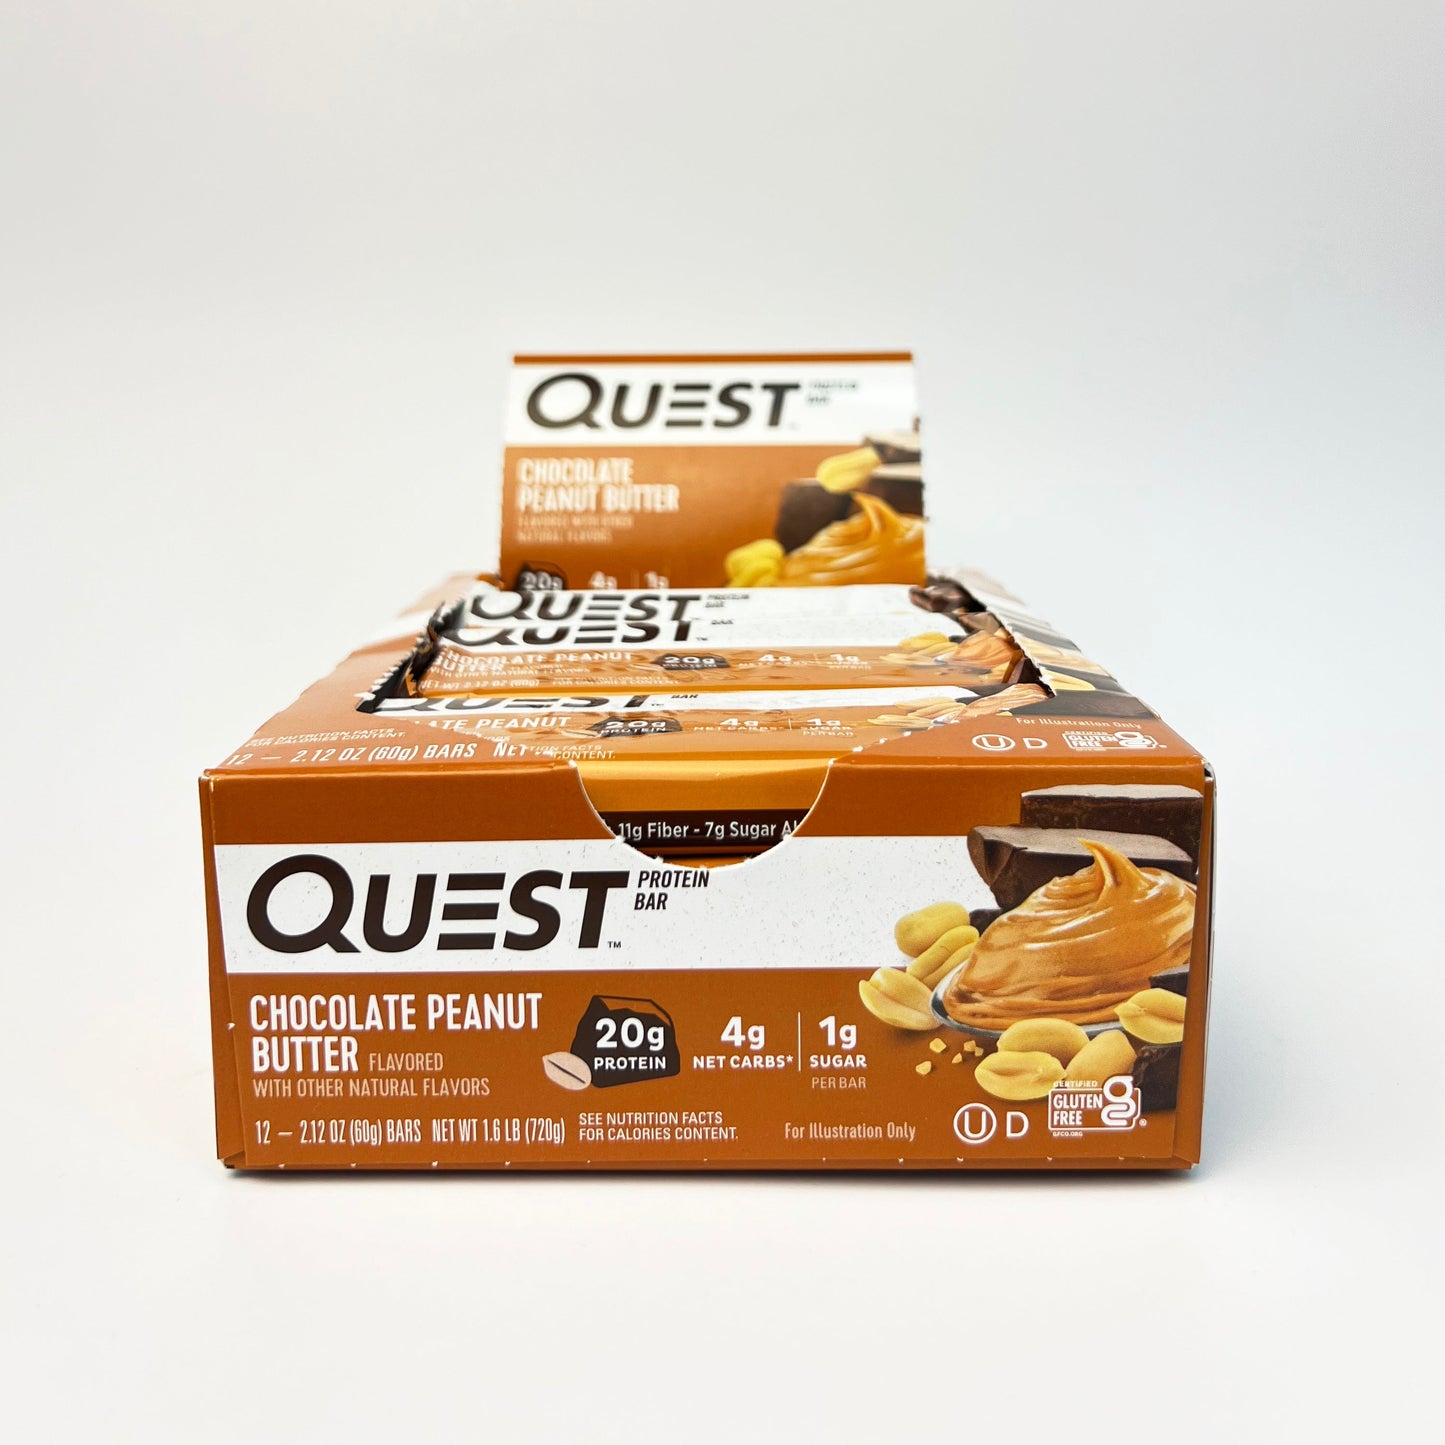 Quest Protein Bars